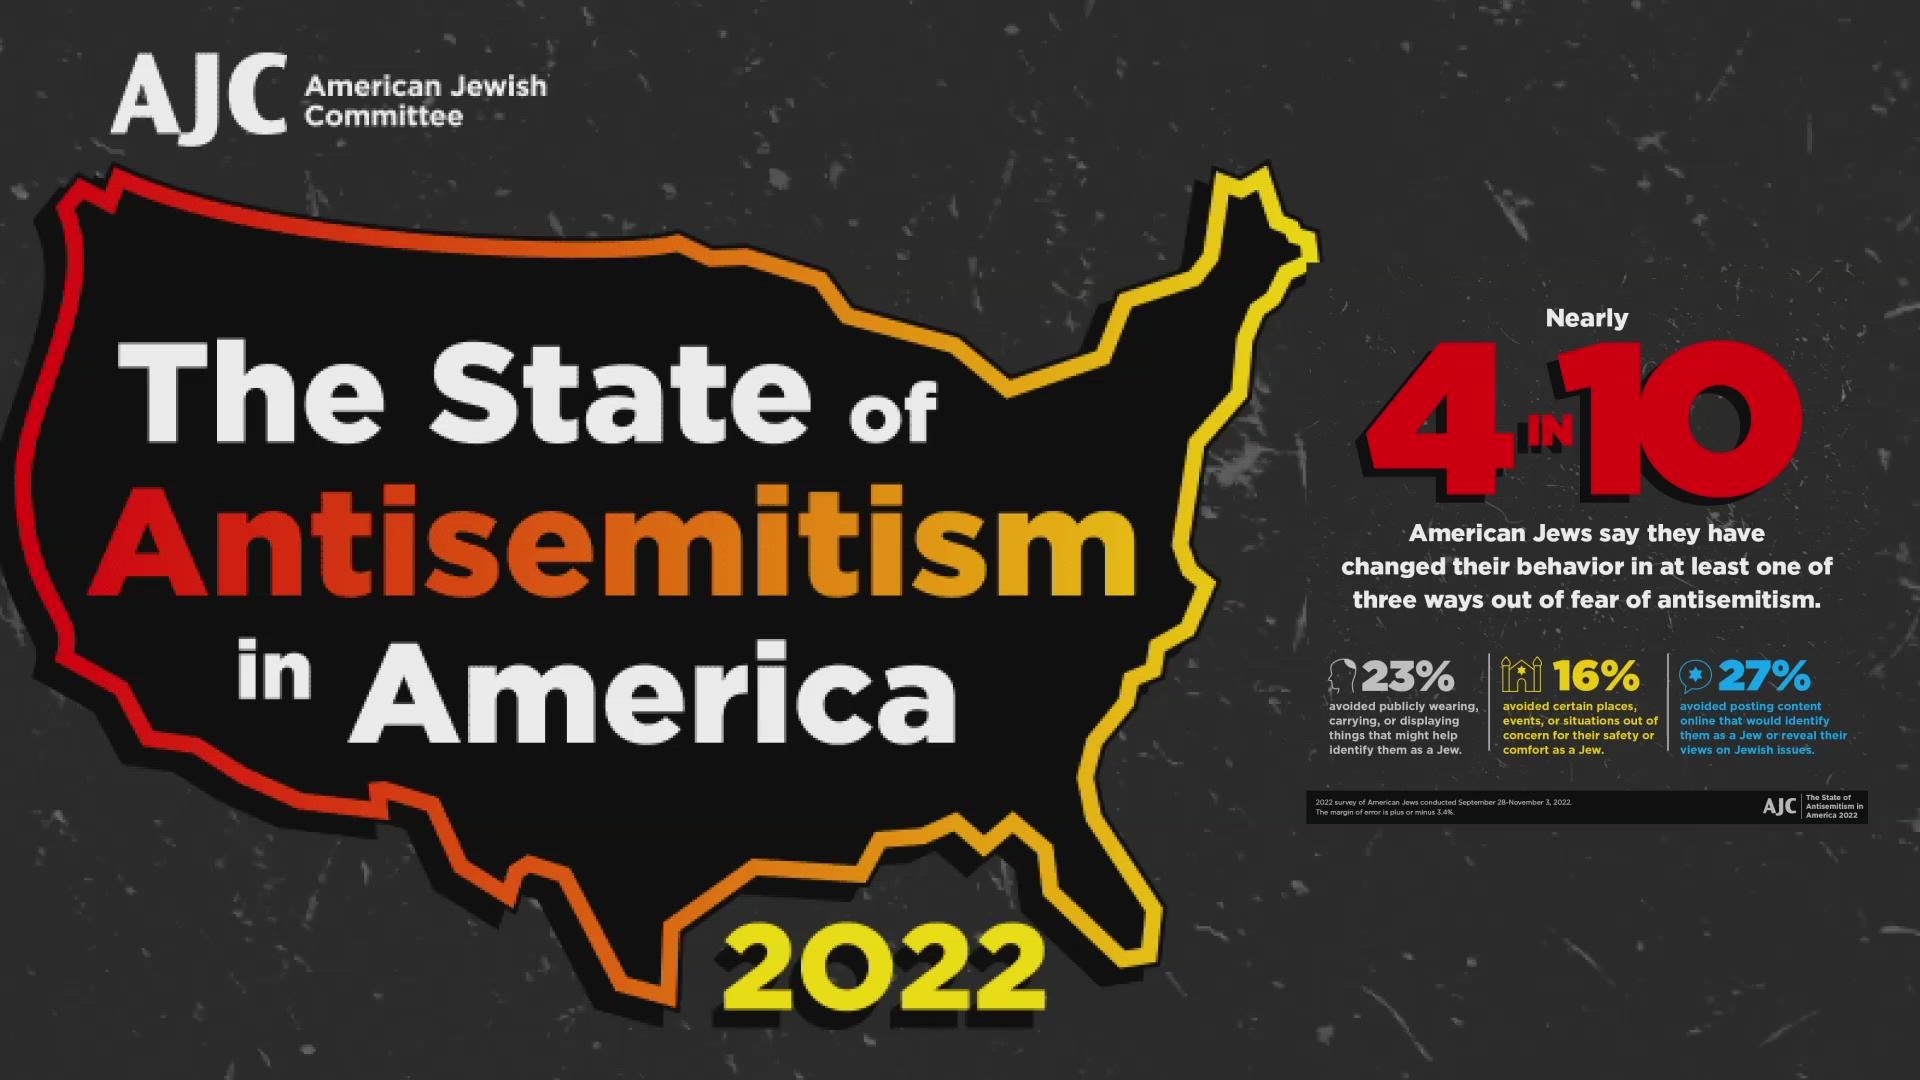 More than 4 in 10 Jews in the United States feel their status in America is less secure than it was a year earlier.